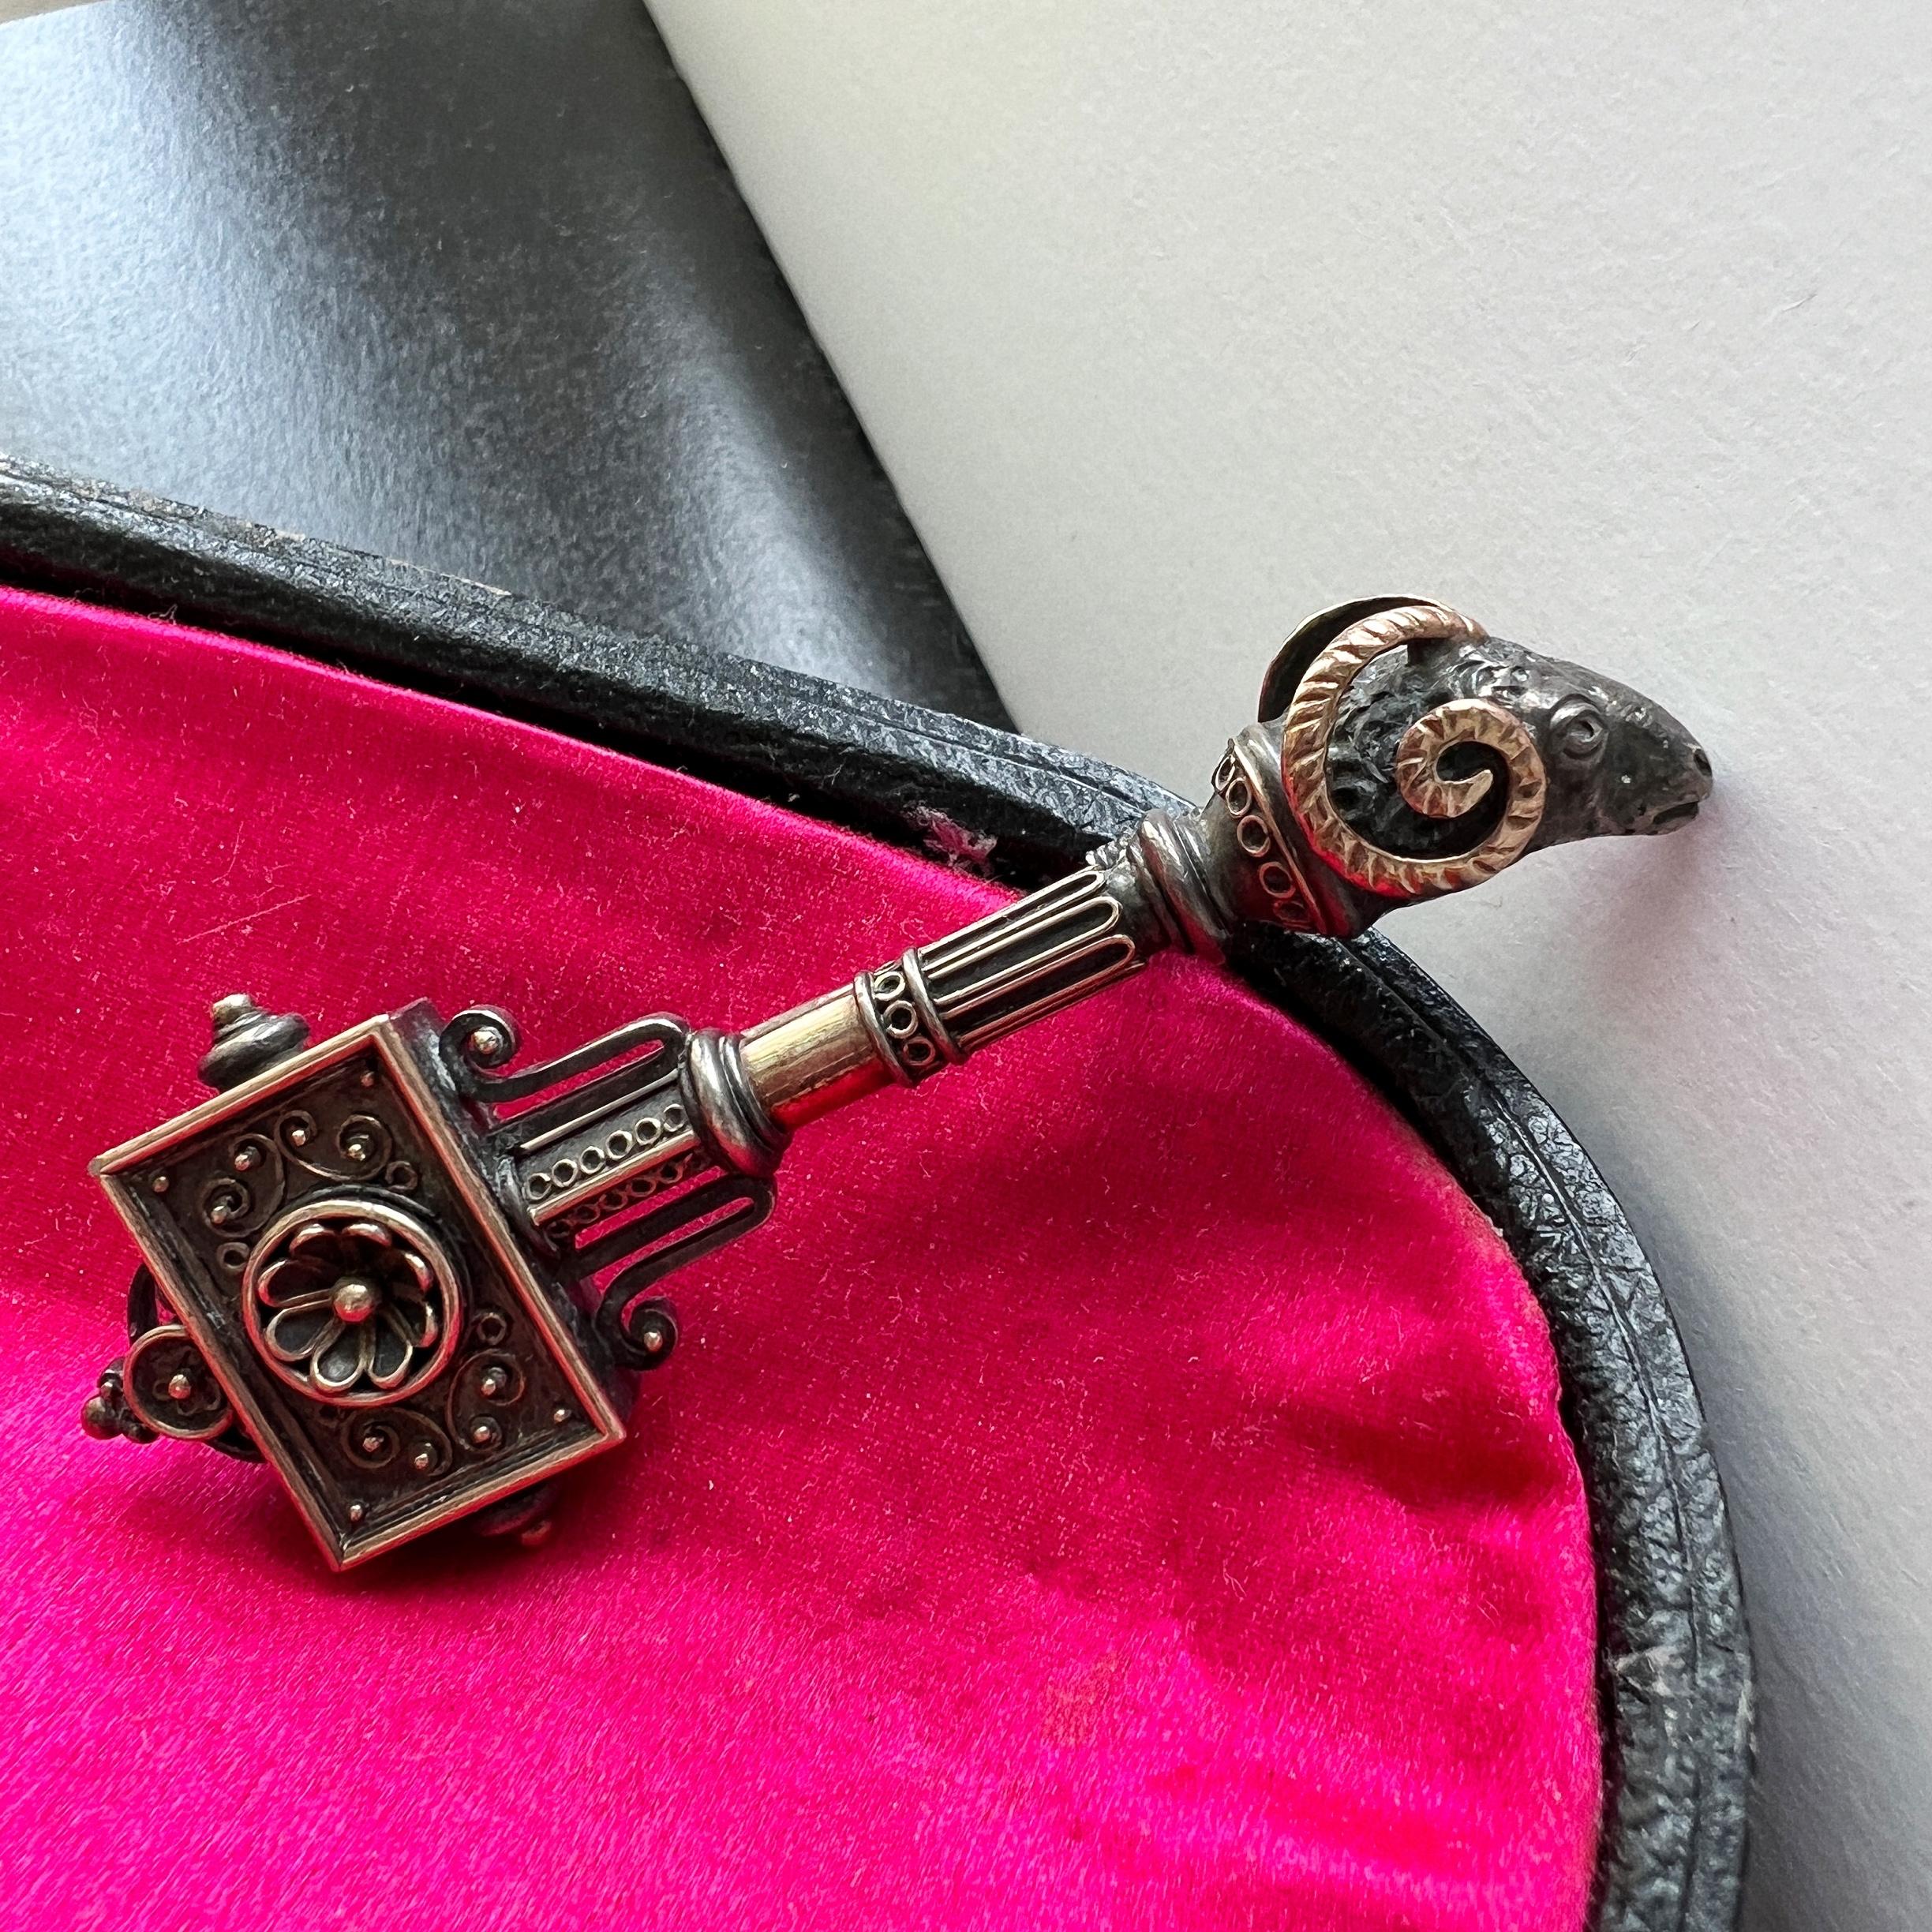 For sale a fine ram head locket brooch in the archaeological style which recalls us of the work of Castellani.

The brooch features a double-sided ram head with a small locket at the back. The jewelry is skillfully worked to reflect the lost art of